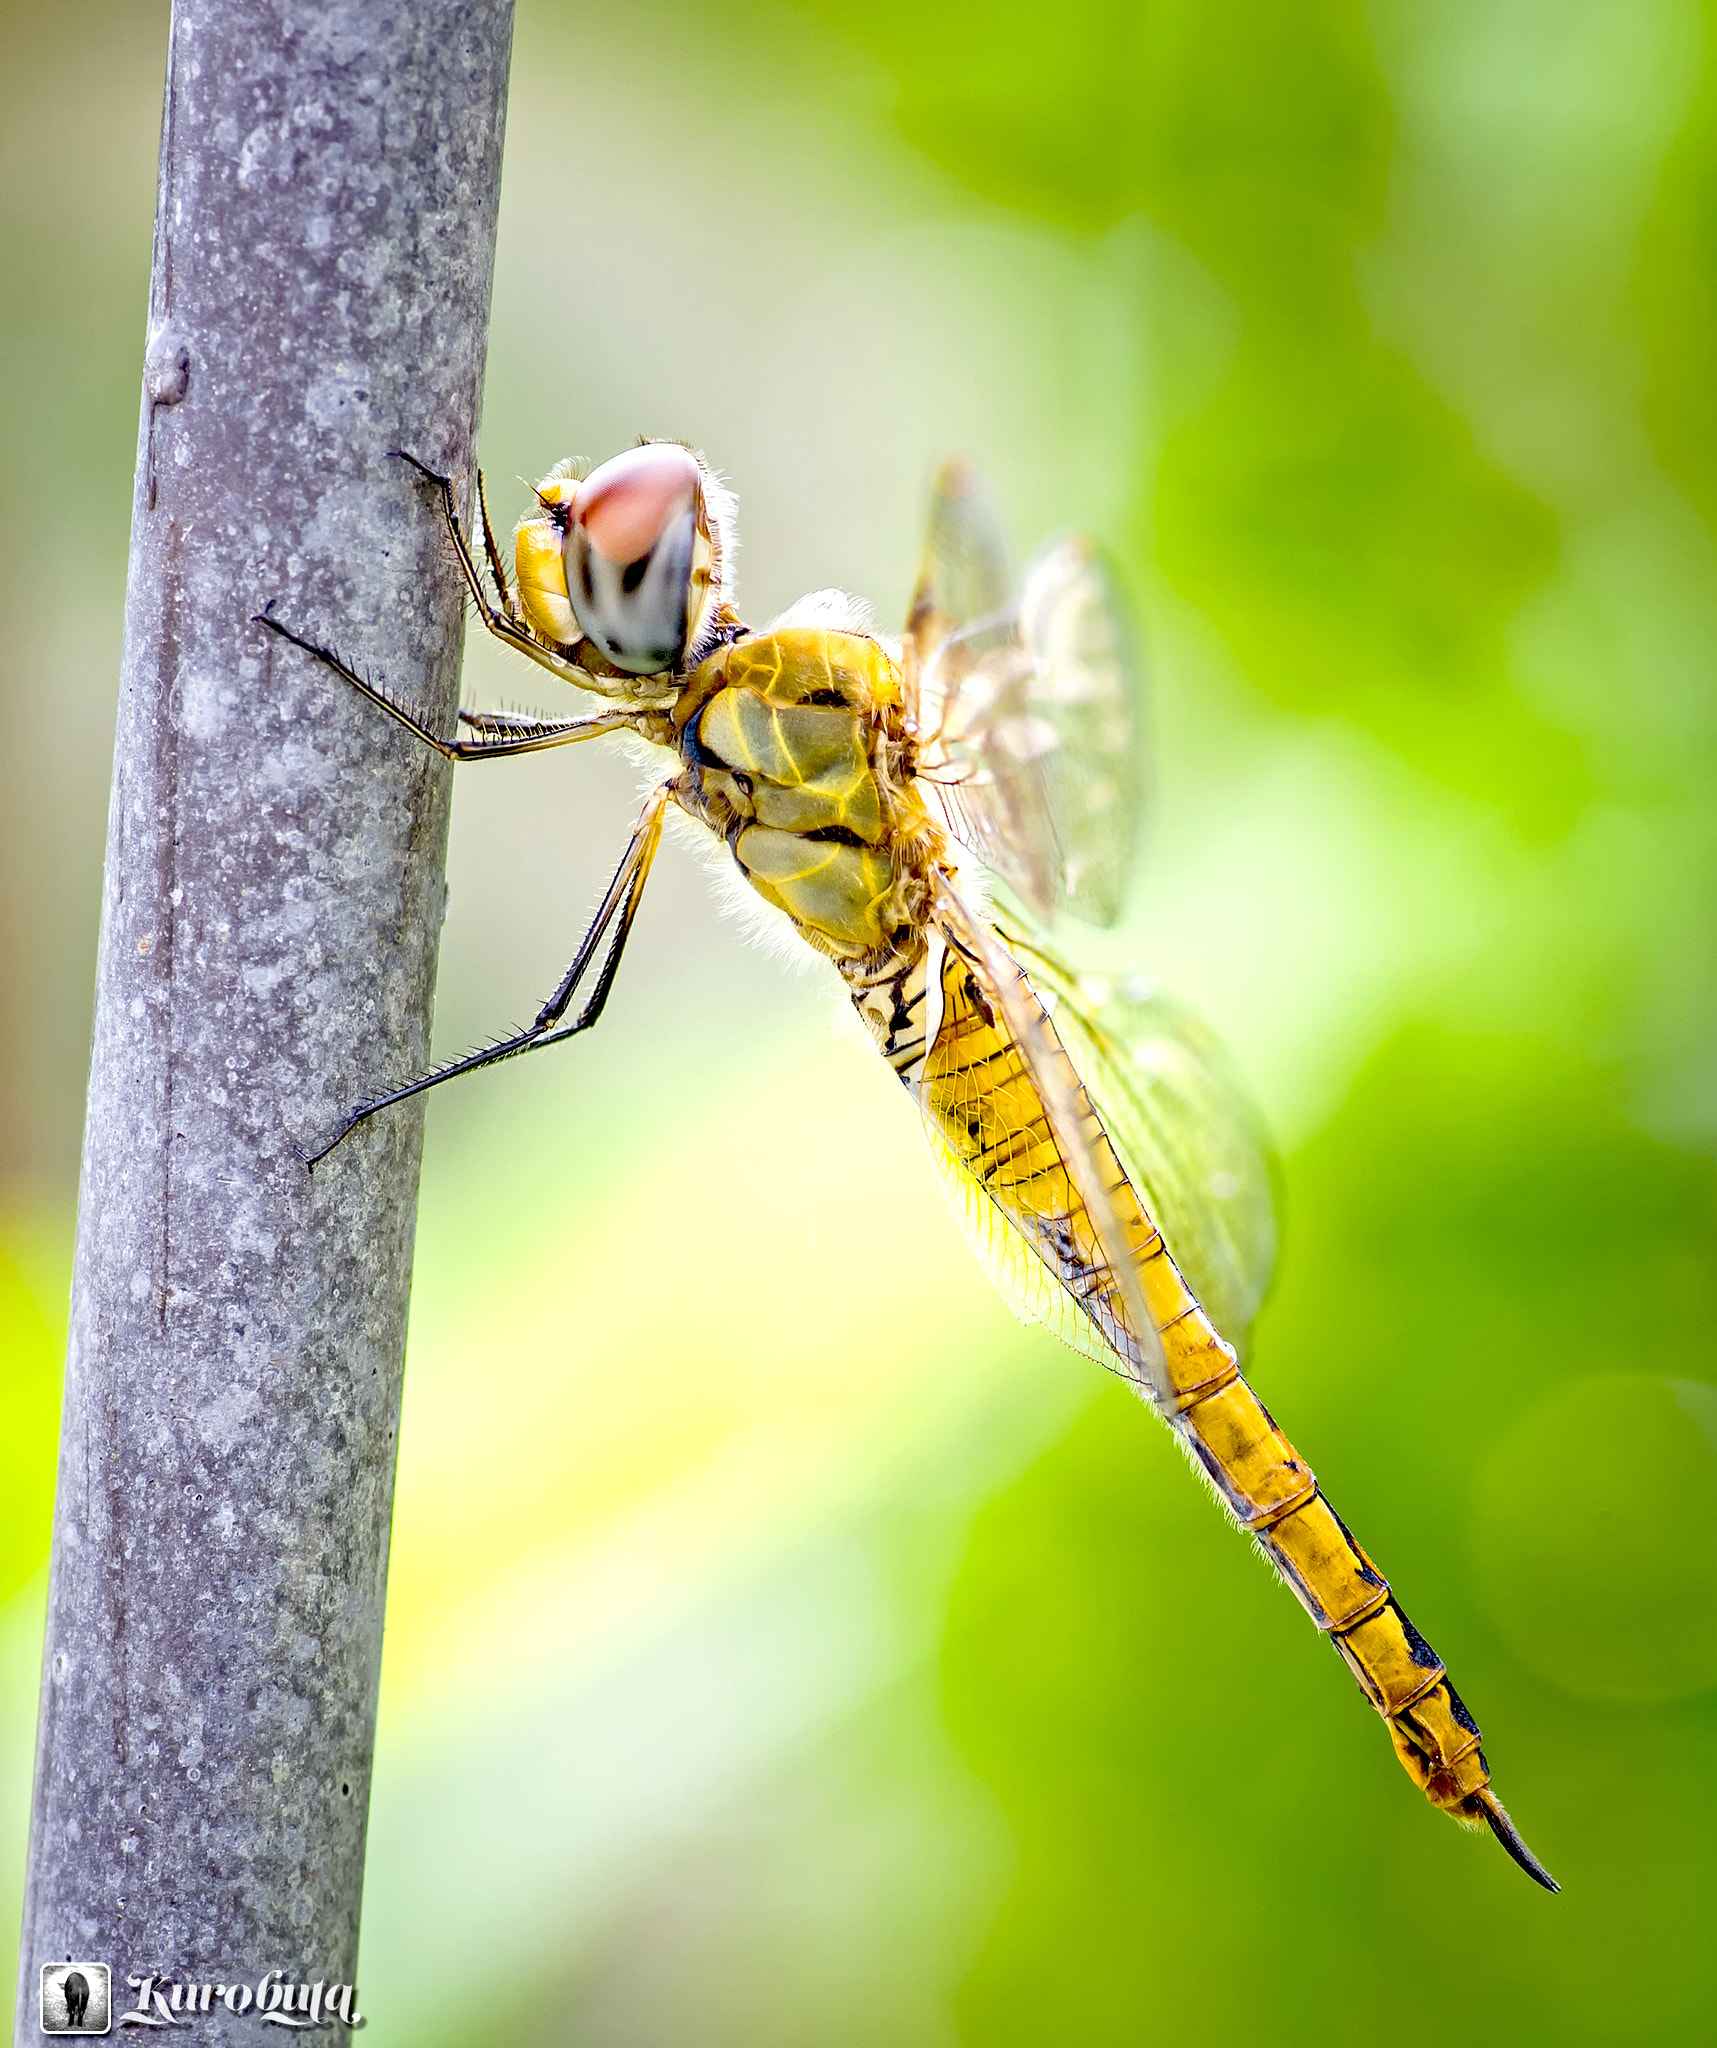 Pentax K-5 IIs sample photo. Dragonfly at rest photography